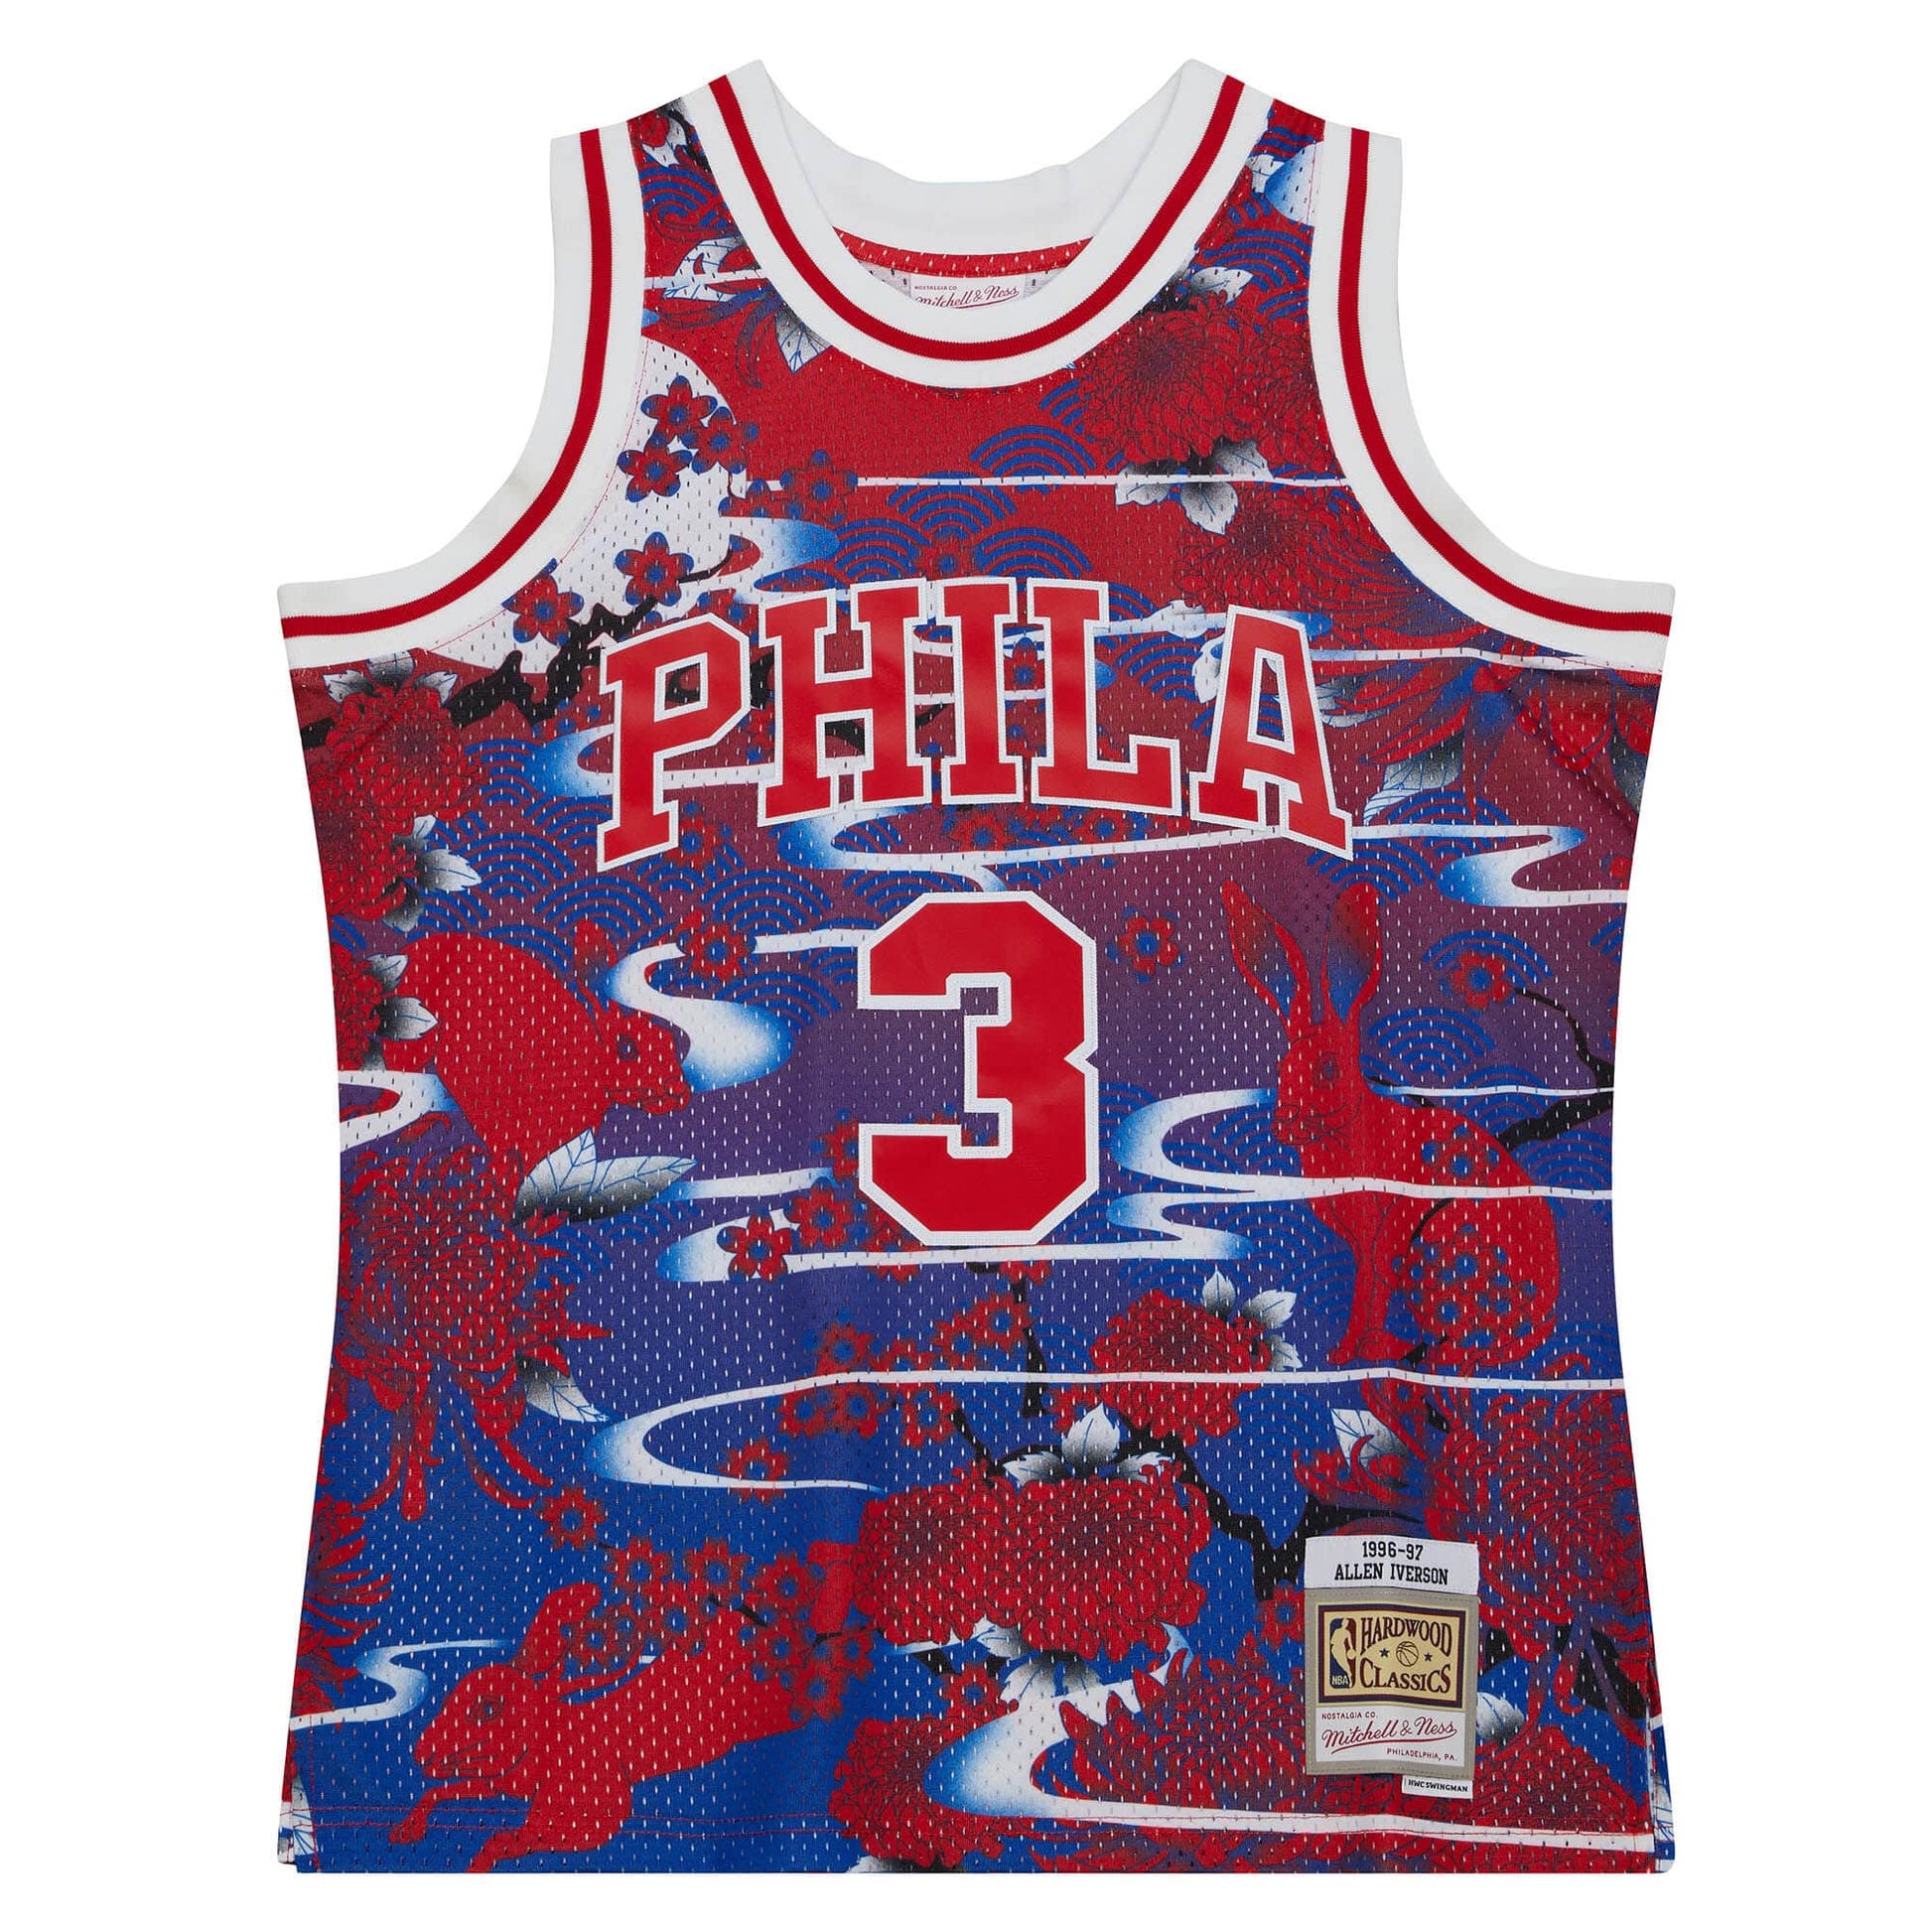 What will the 76ers Heritage Uniforms look like?